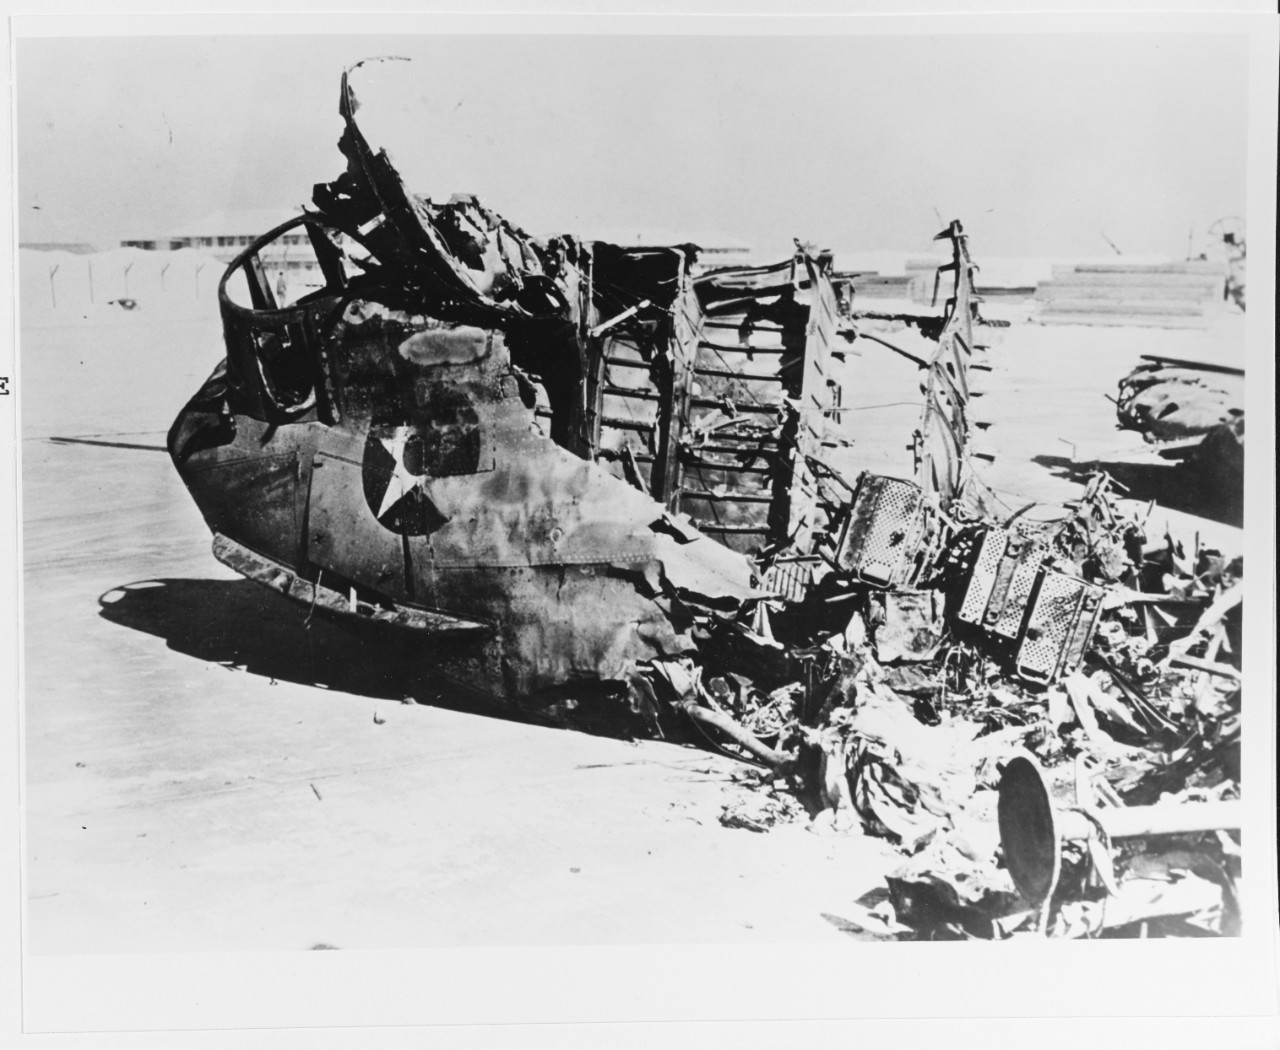 Photo #: 80-G-2299  Japanese attack on Midway Island, 7 December 1941